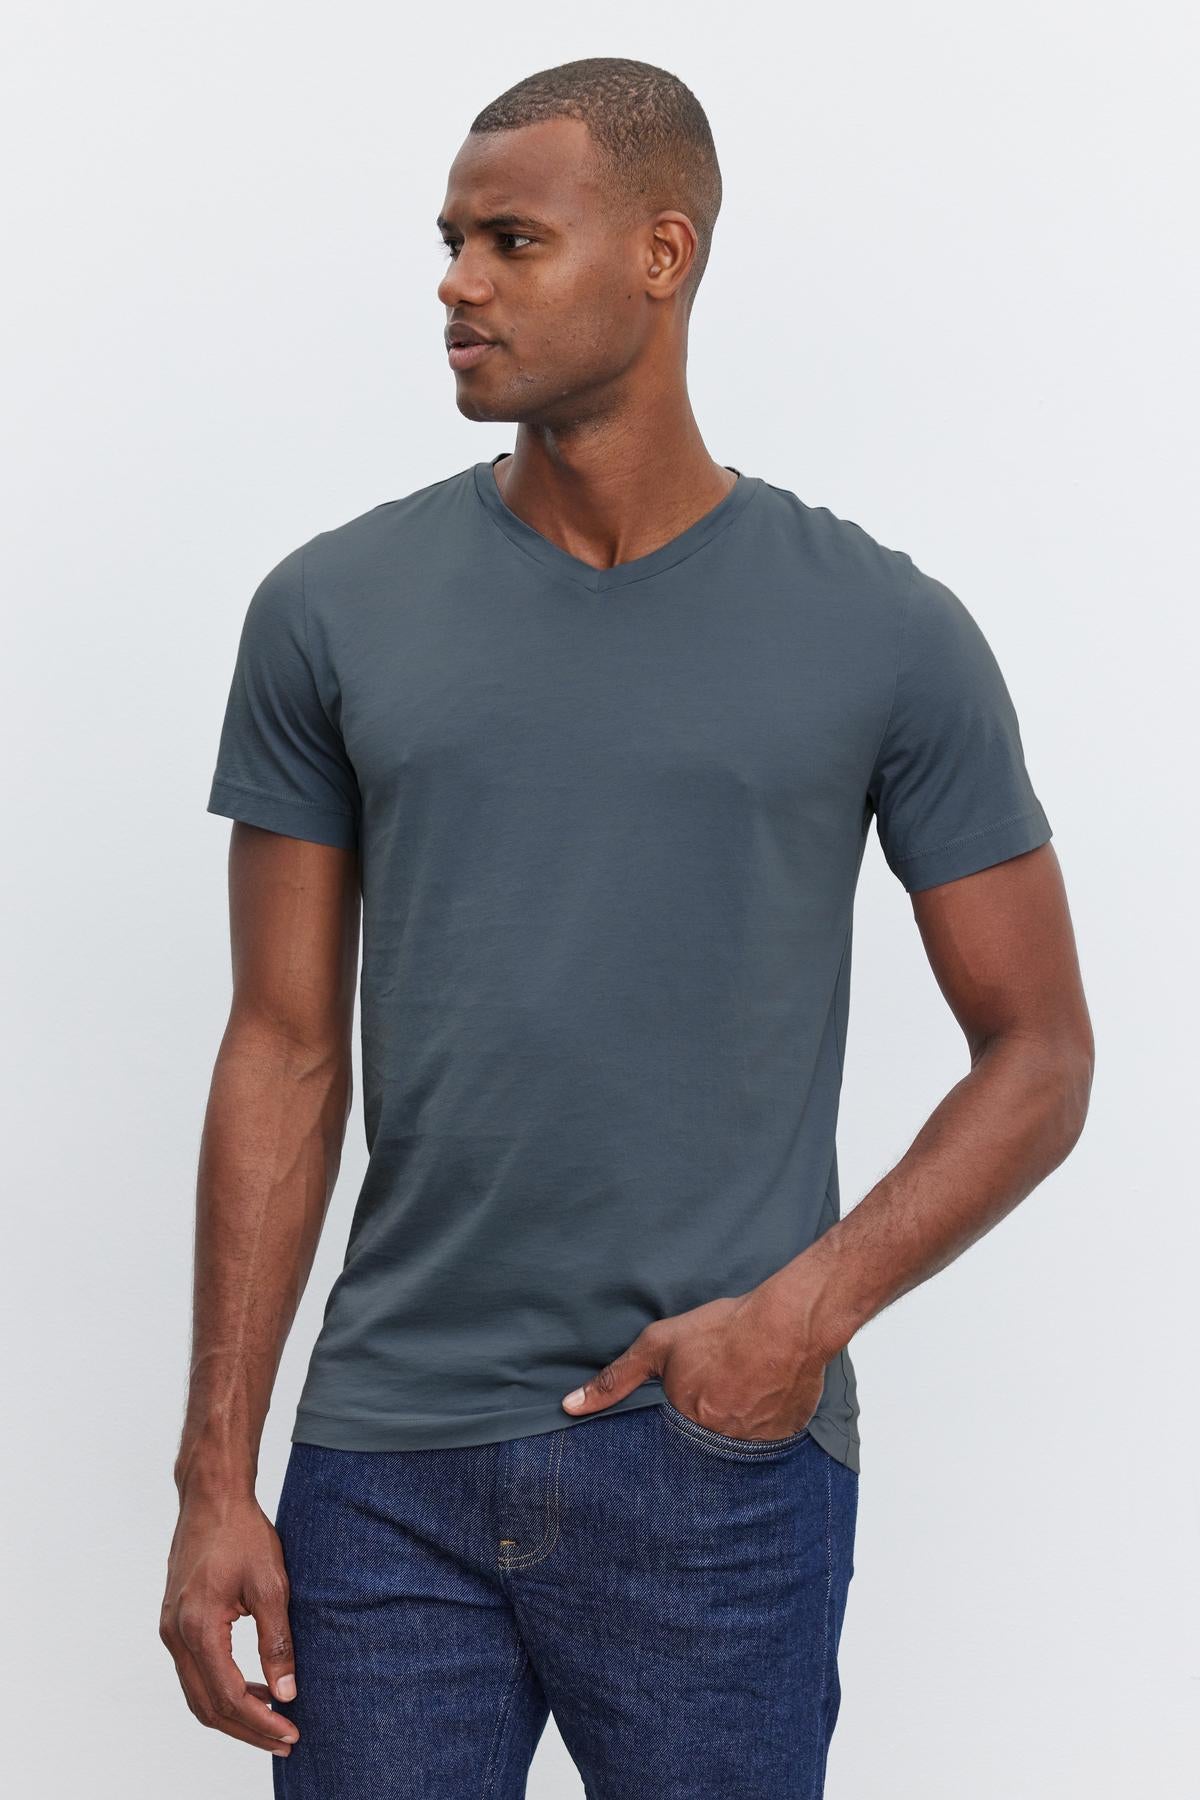 A man, showcasing everyday wear, is dressed in a fitted dark gray V-neck SAMSEN TEE by Velvet by Graham & Spencer and blue jeans. He stands against a plain light background, looking to the side with one hand in his pocket.-37386135470273